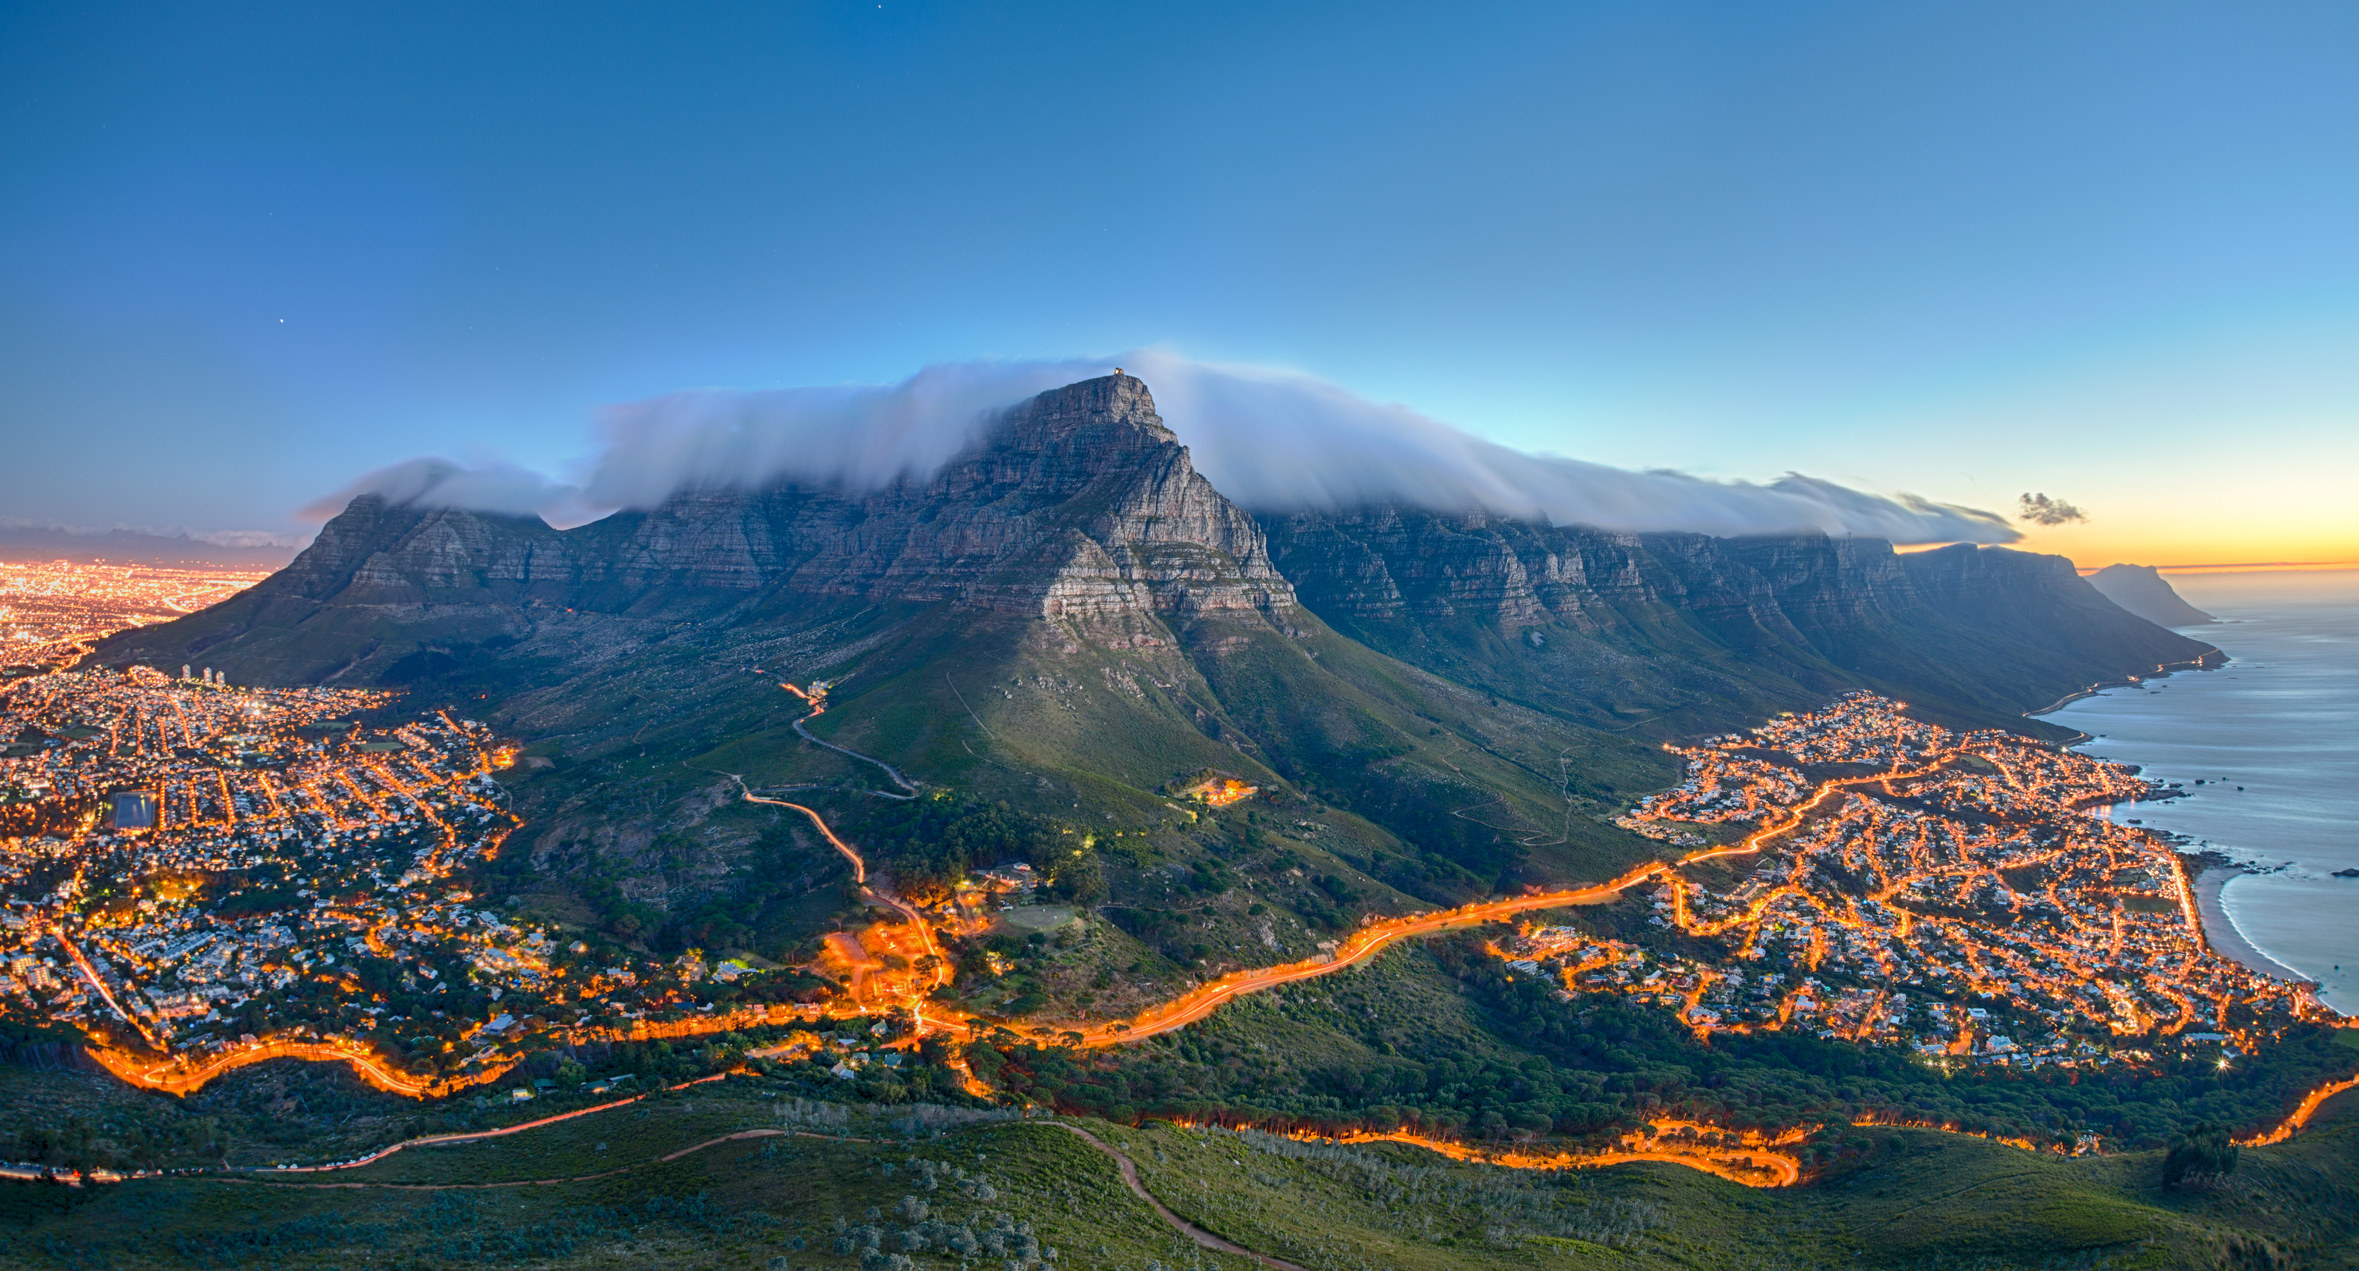 Table Mountain in Cape Town, South Africa.